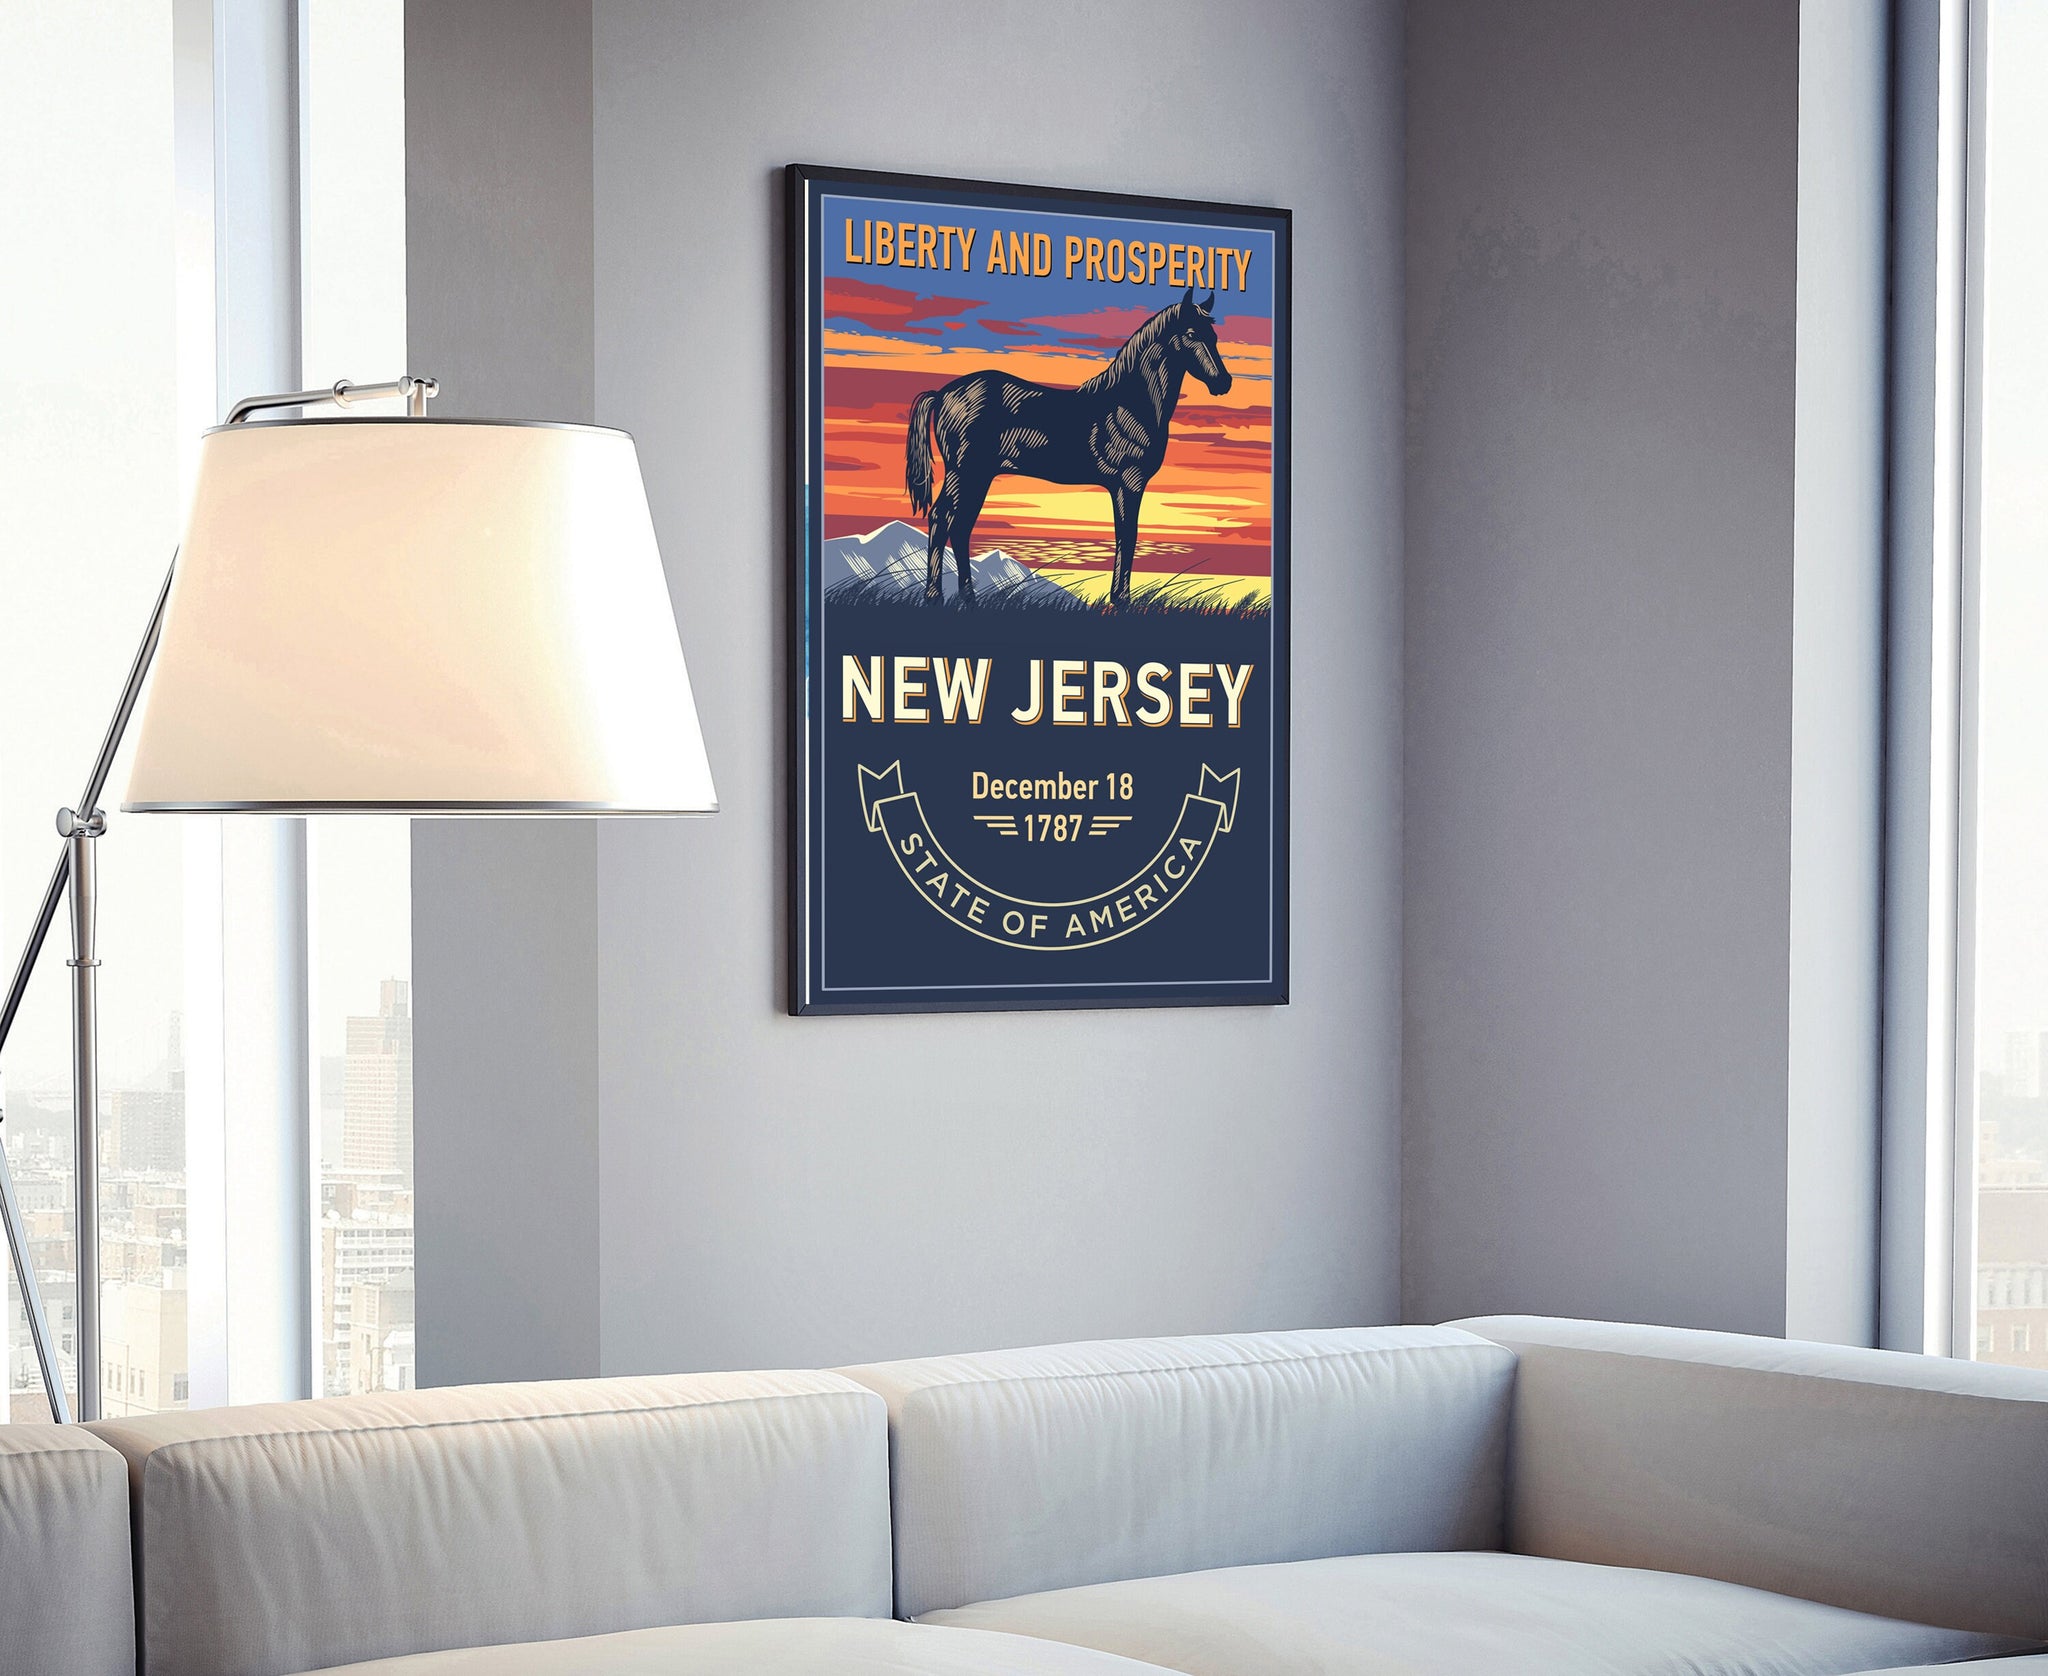 United States Poster, New Jersey State Poster Print, New Jersey State Emblem Poster, Retro Travel State Poster, Home Office Wall Art